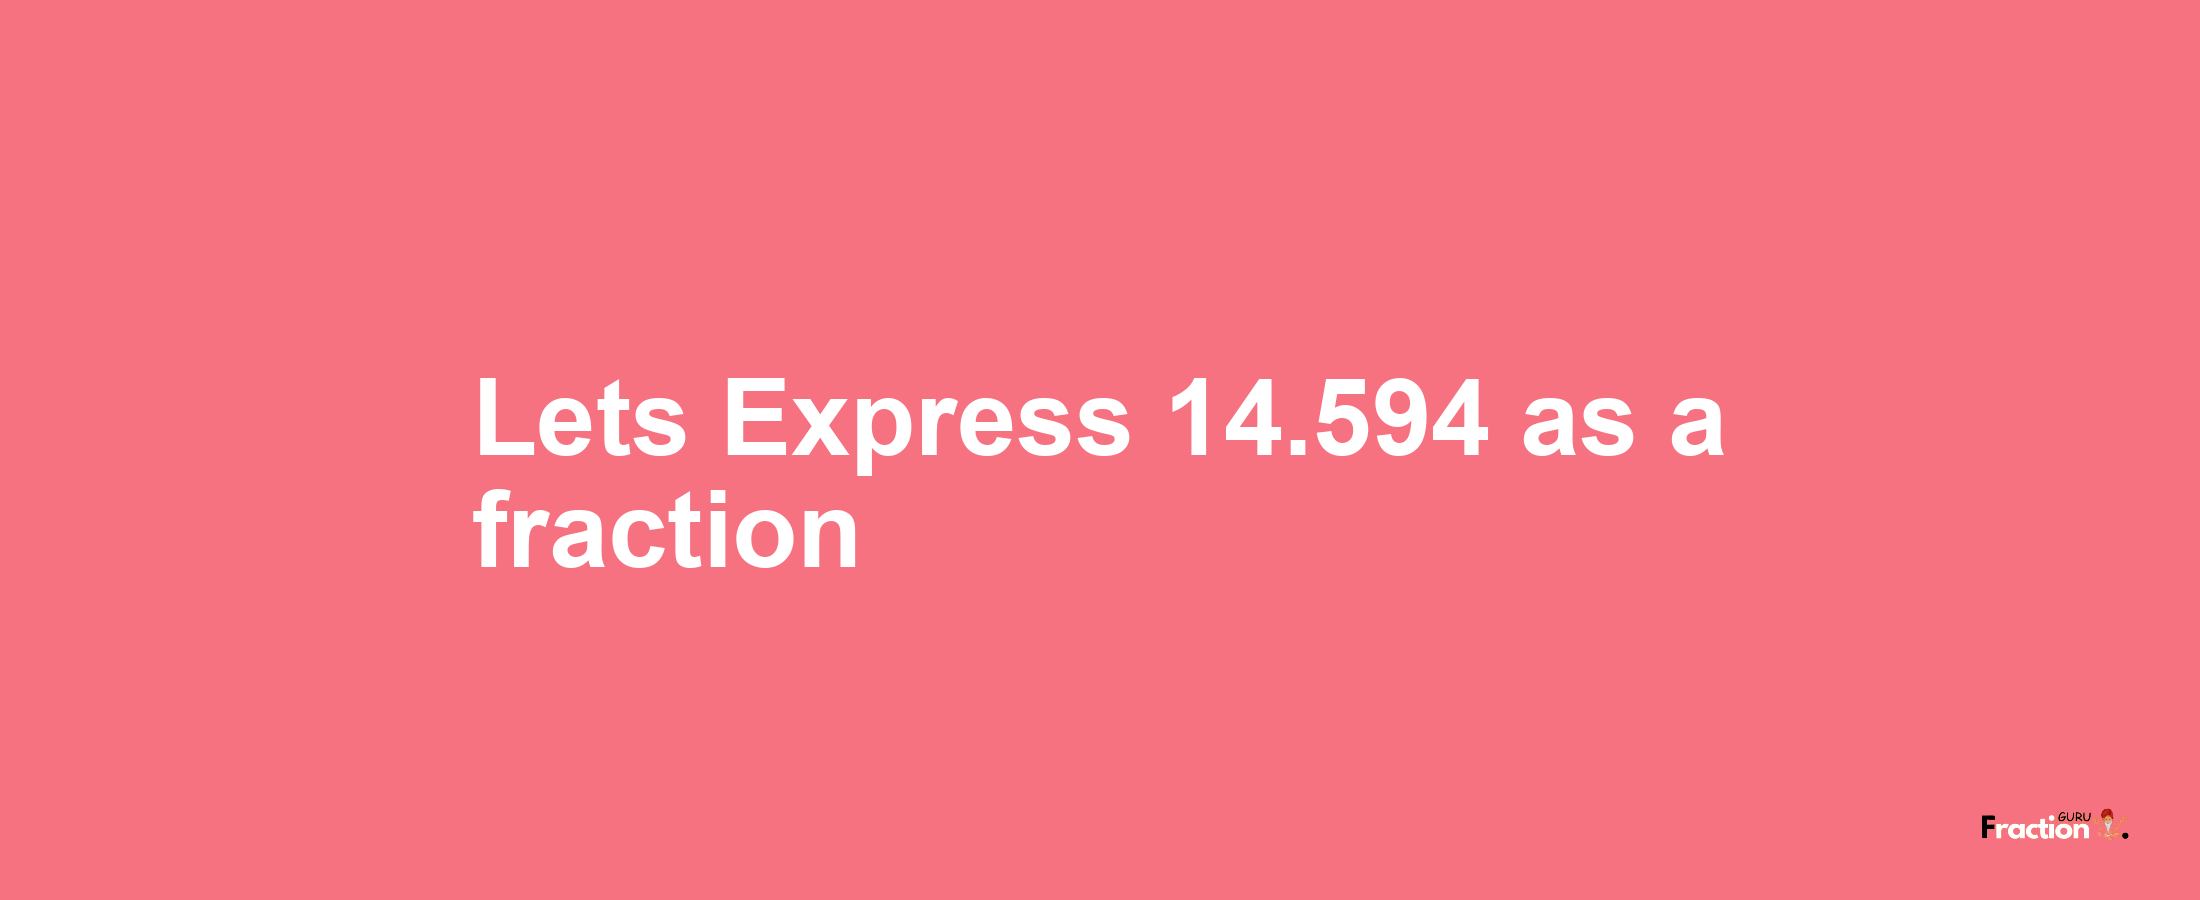 Lets Express 14.594 as afraction